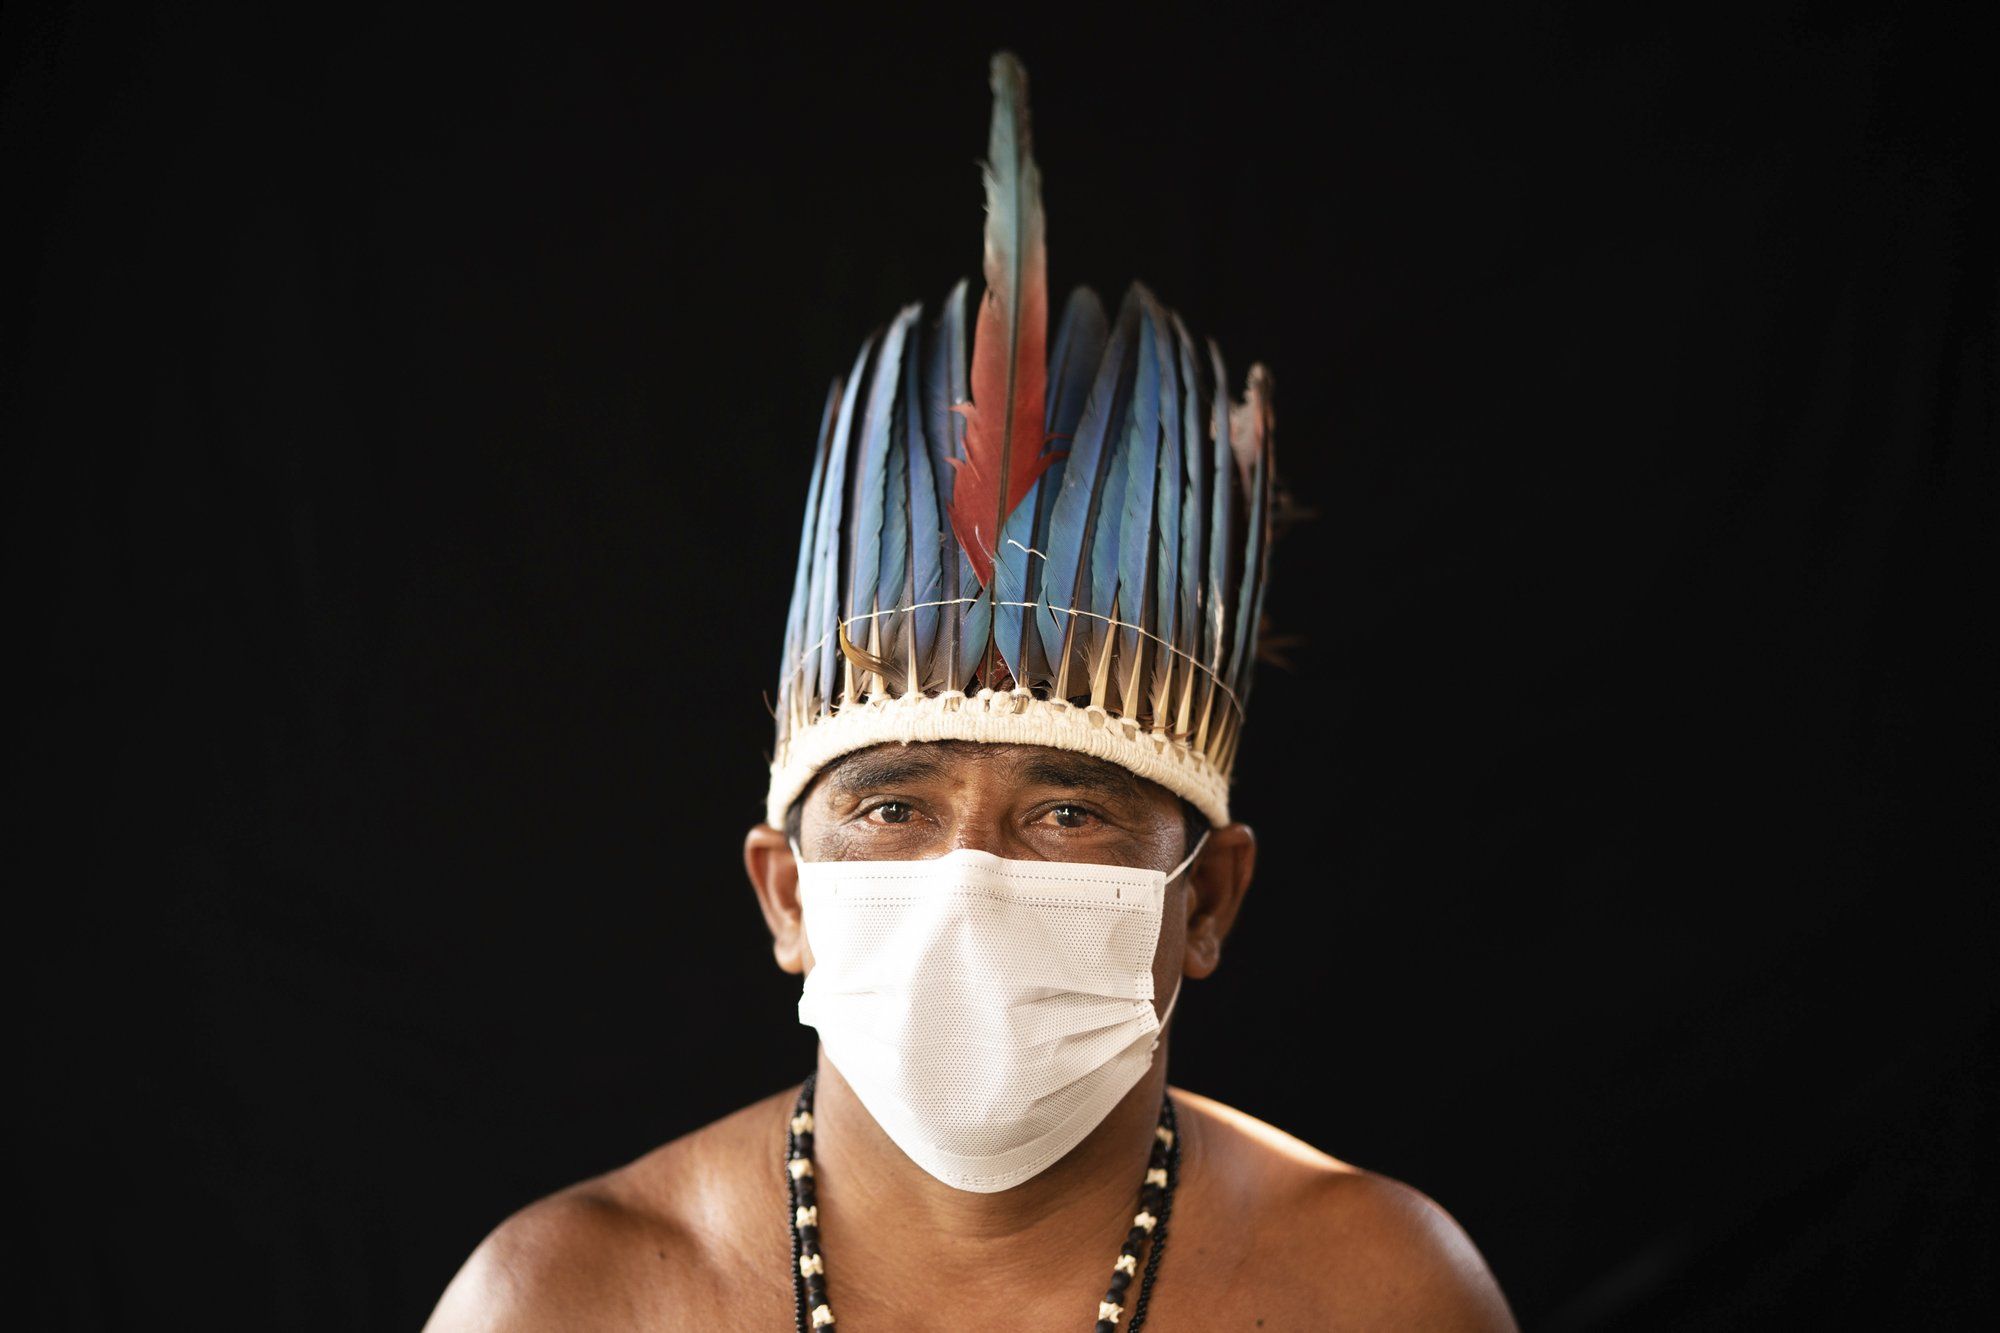 Eleomar da Silva, 44, of the Sateré Mawé indigenous ethnic group, poses for a portrait wearing the traditional dress of his tribe and a face mask amid the spread of the new coronavirus in the Gaviao community near Manaus, Brazil, Friday, May 29, 2020. Image by Felipe Dana / AP Photo. Brazil, 2020.